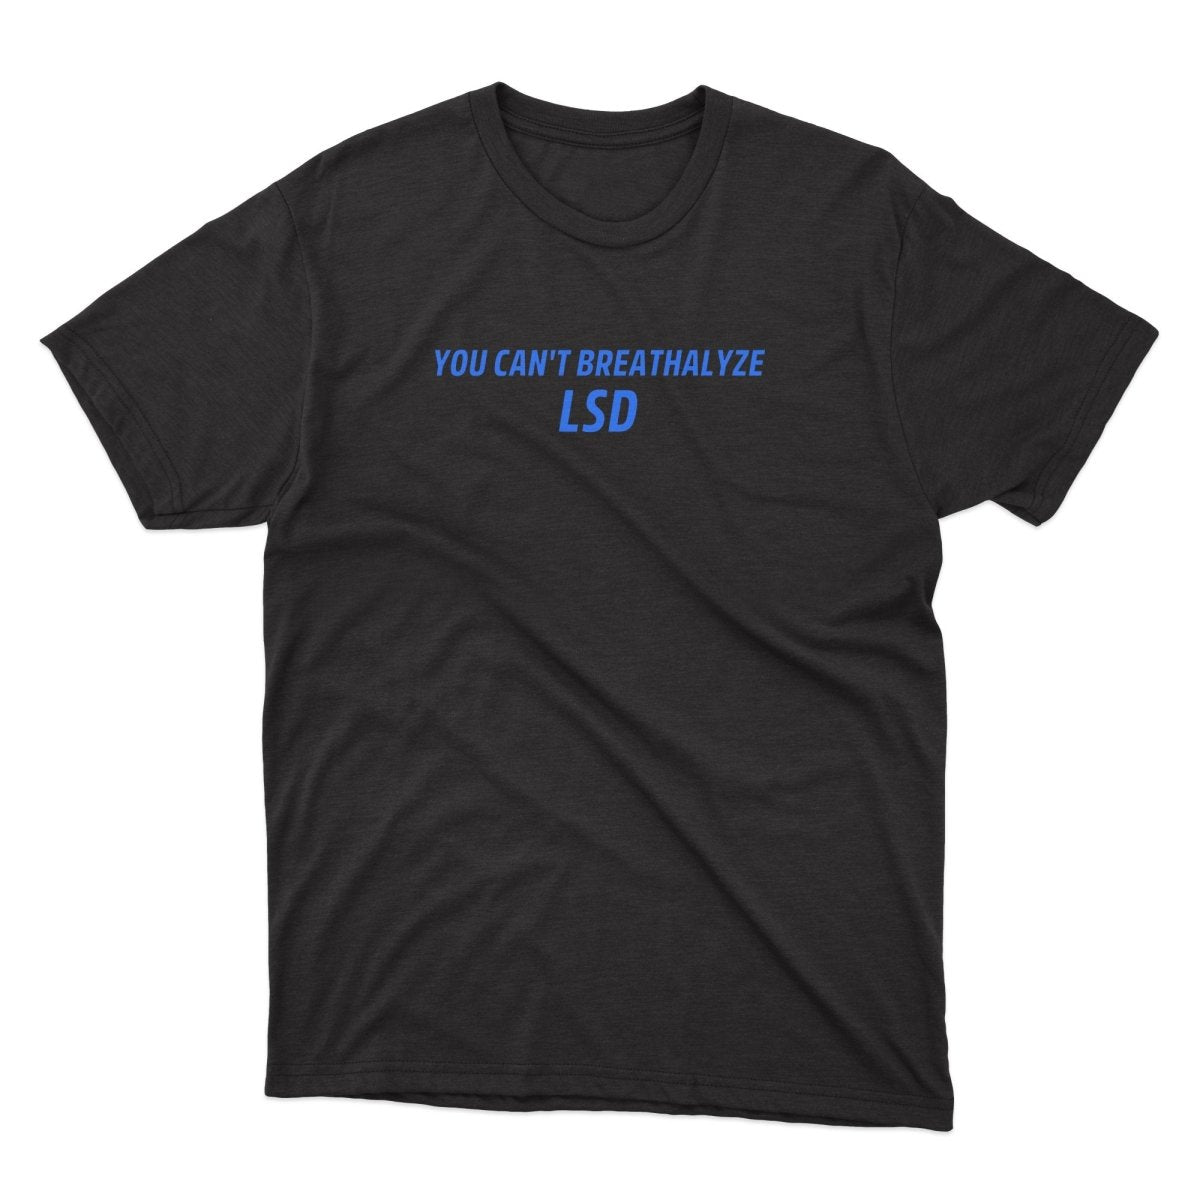 You Can't Breathalyze LSD Shirt - stickerbullYou Can't Breathalyze LSD ShirtShirtsPrintifystickerbull29247205934267009809BlackSa black t - shirt with the words you can't breathe, i '